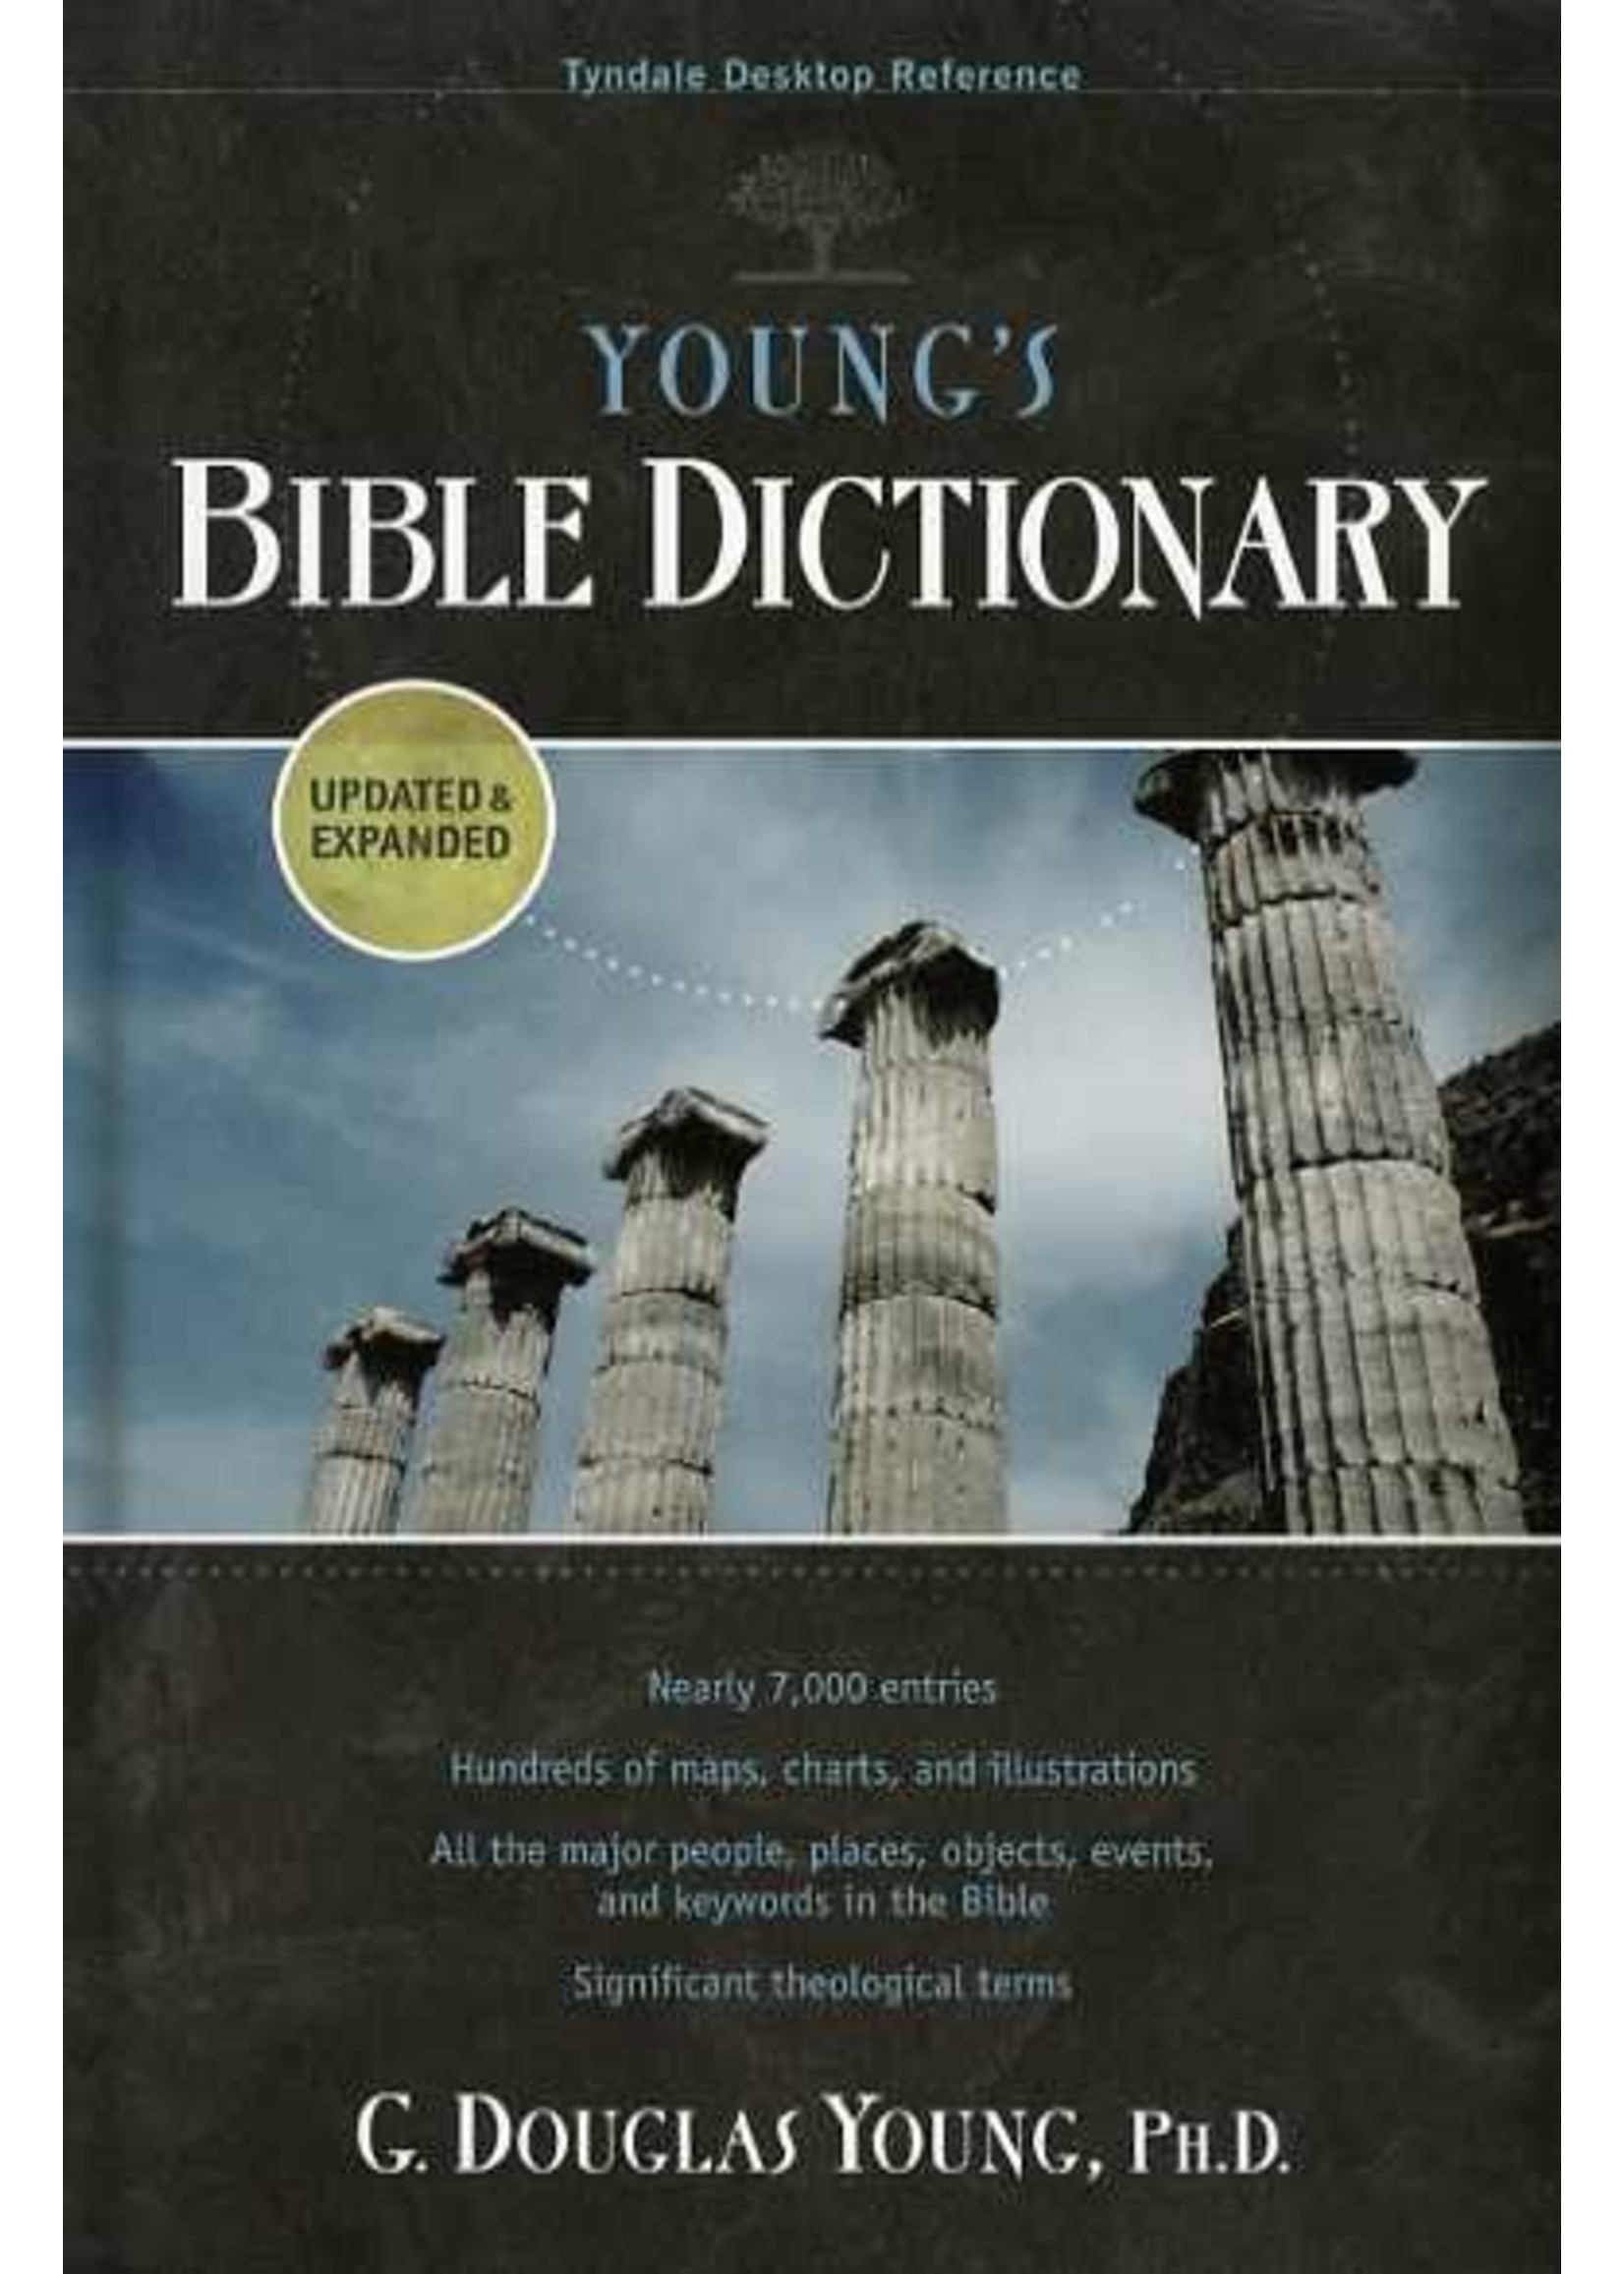 Tyndale Young's Bible Dictionary - Douglas Young